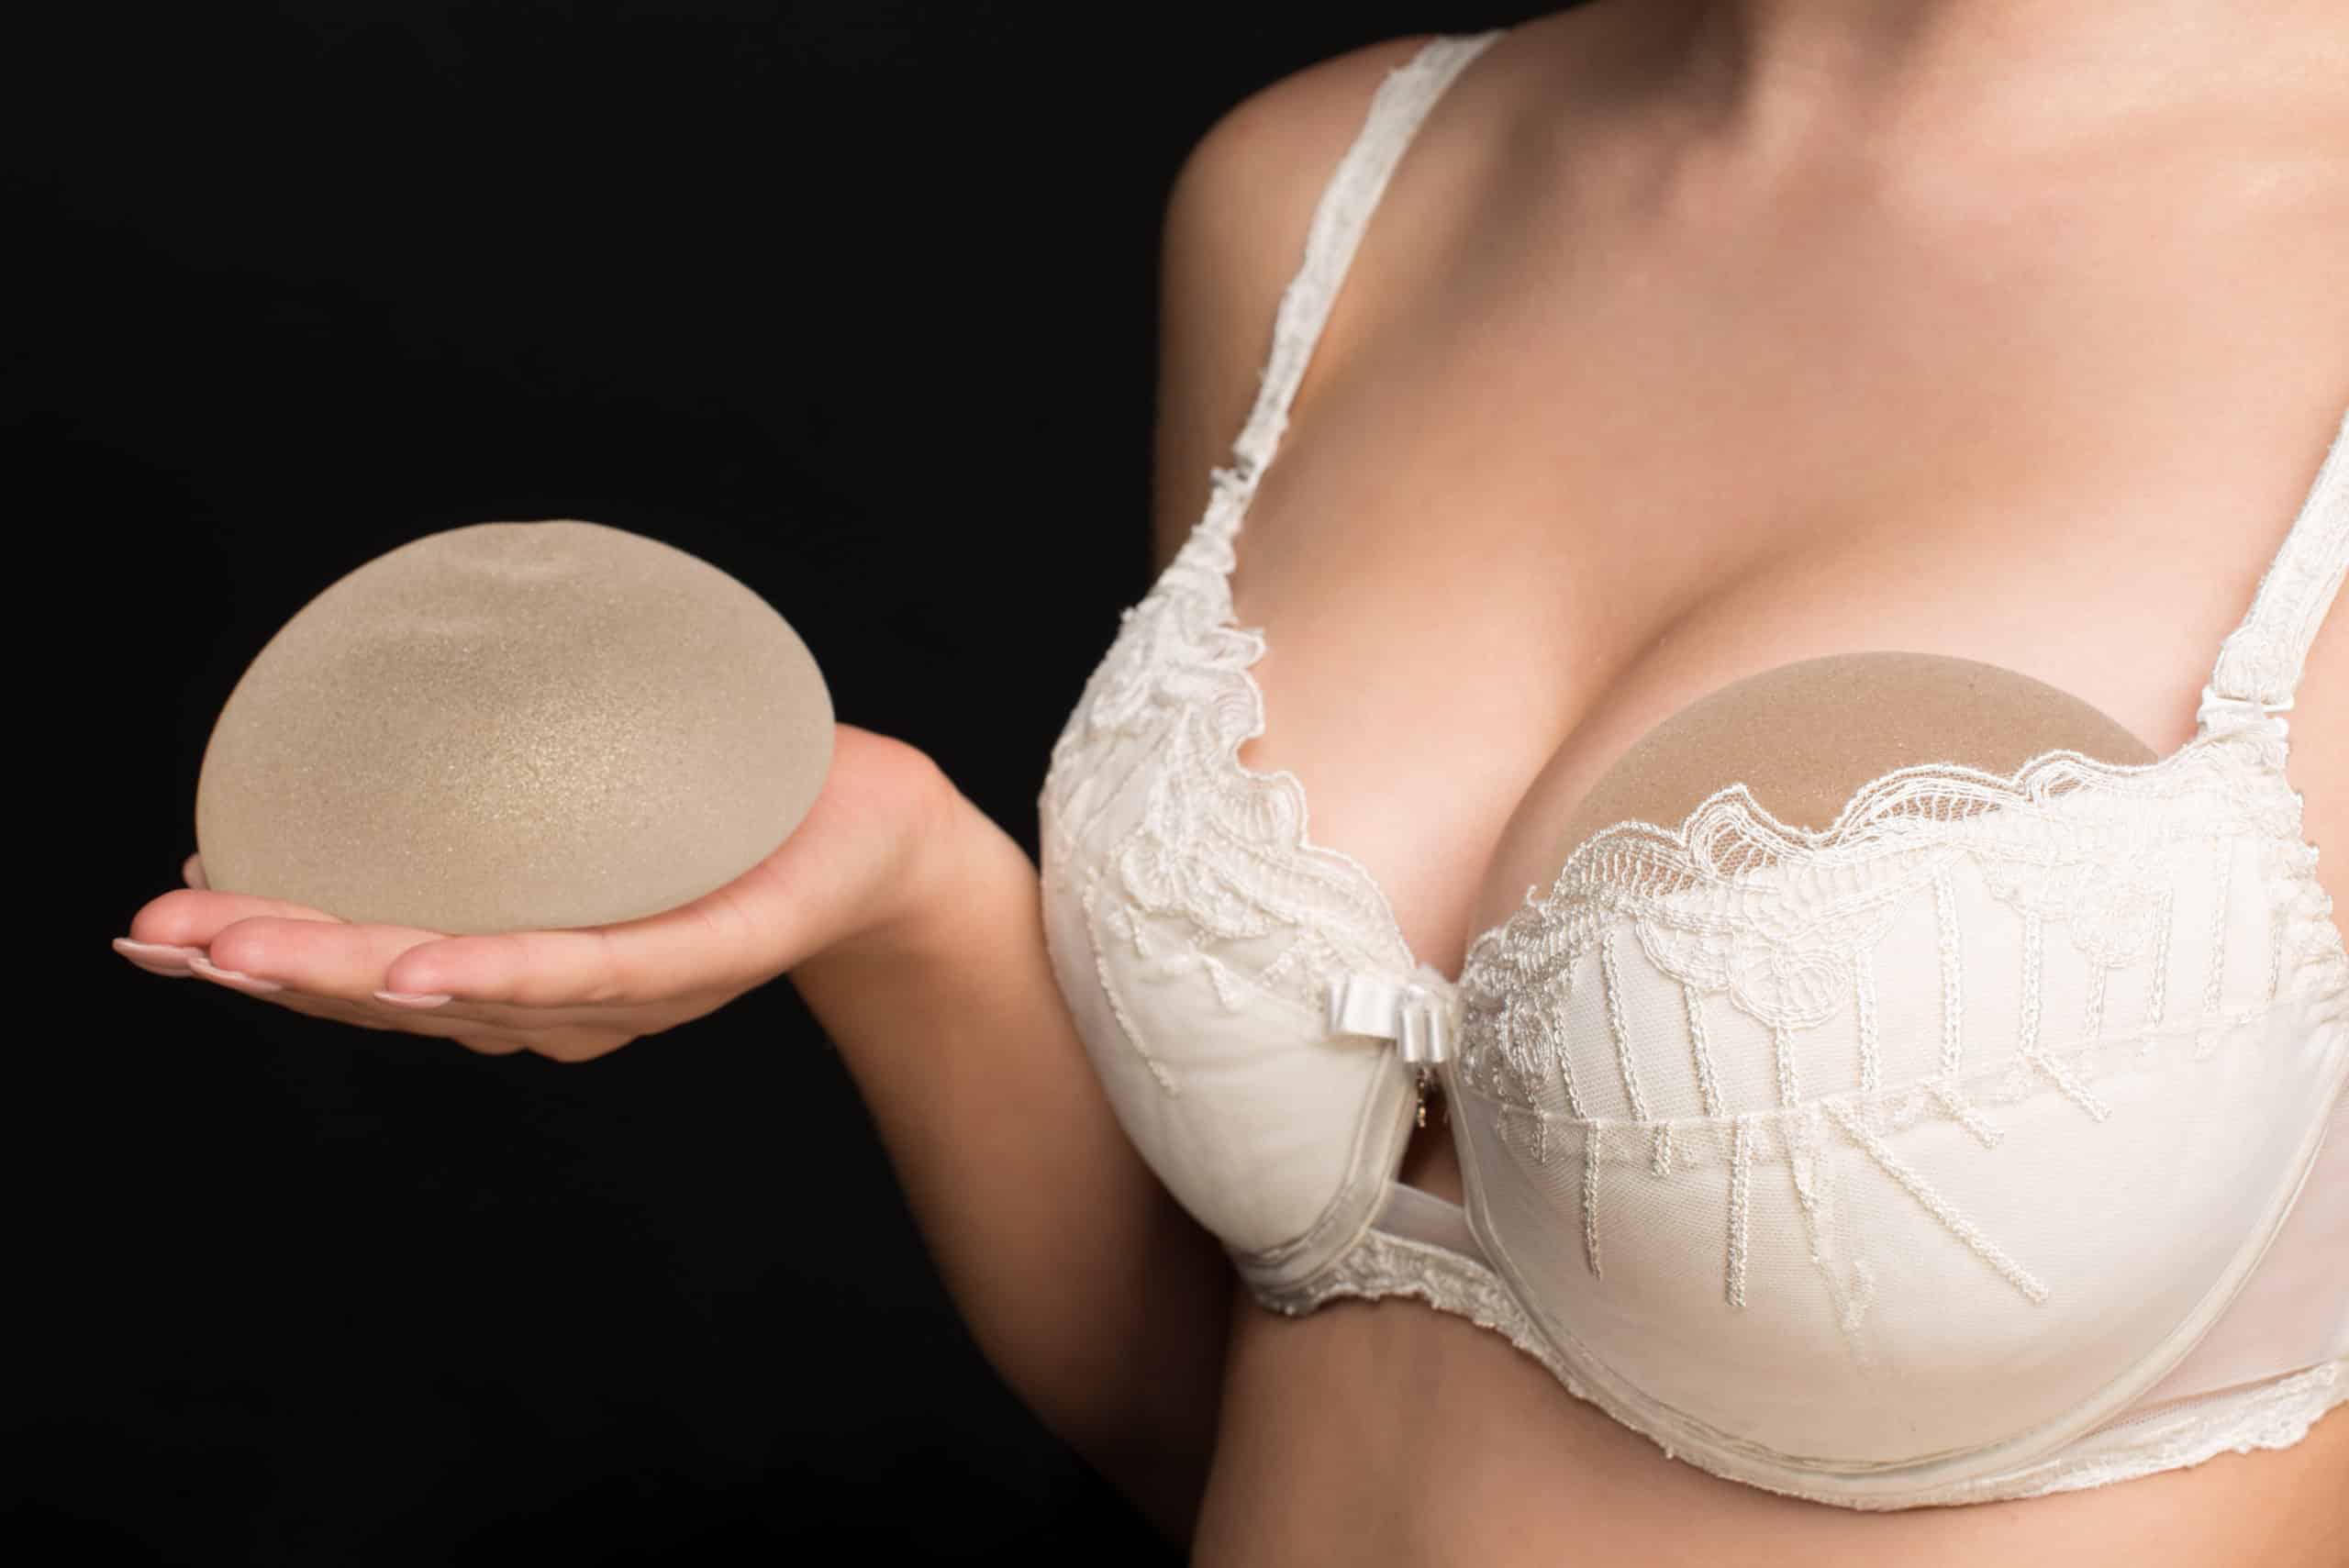 Breast Reconstruction with Ideal Implants – Patient 312